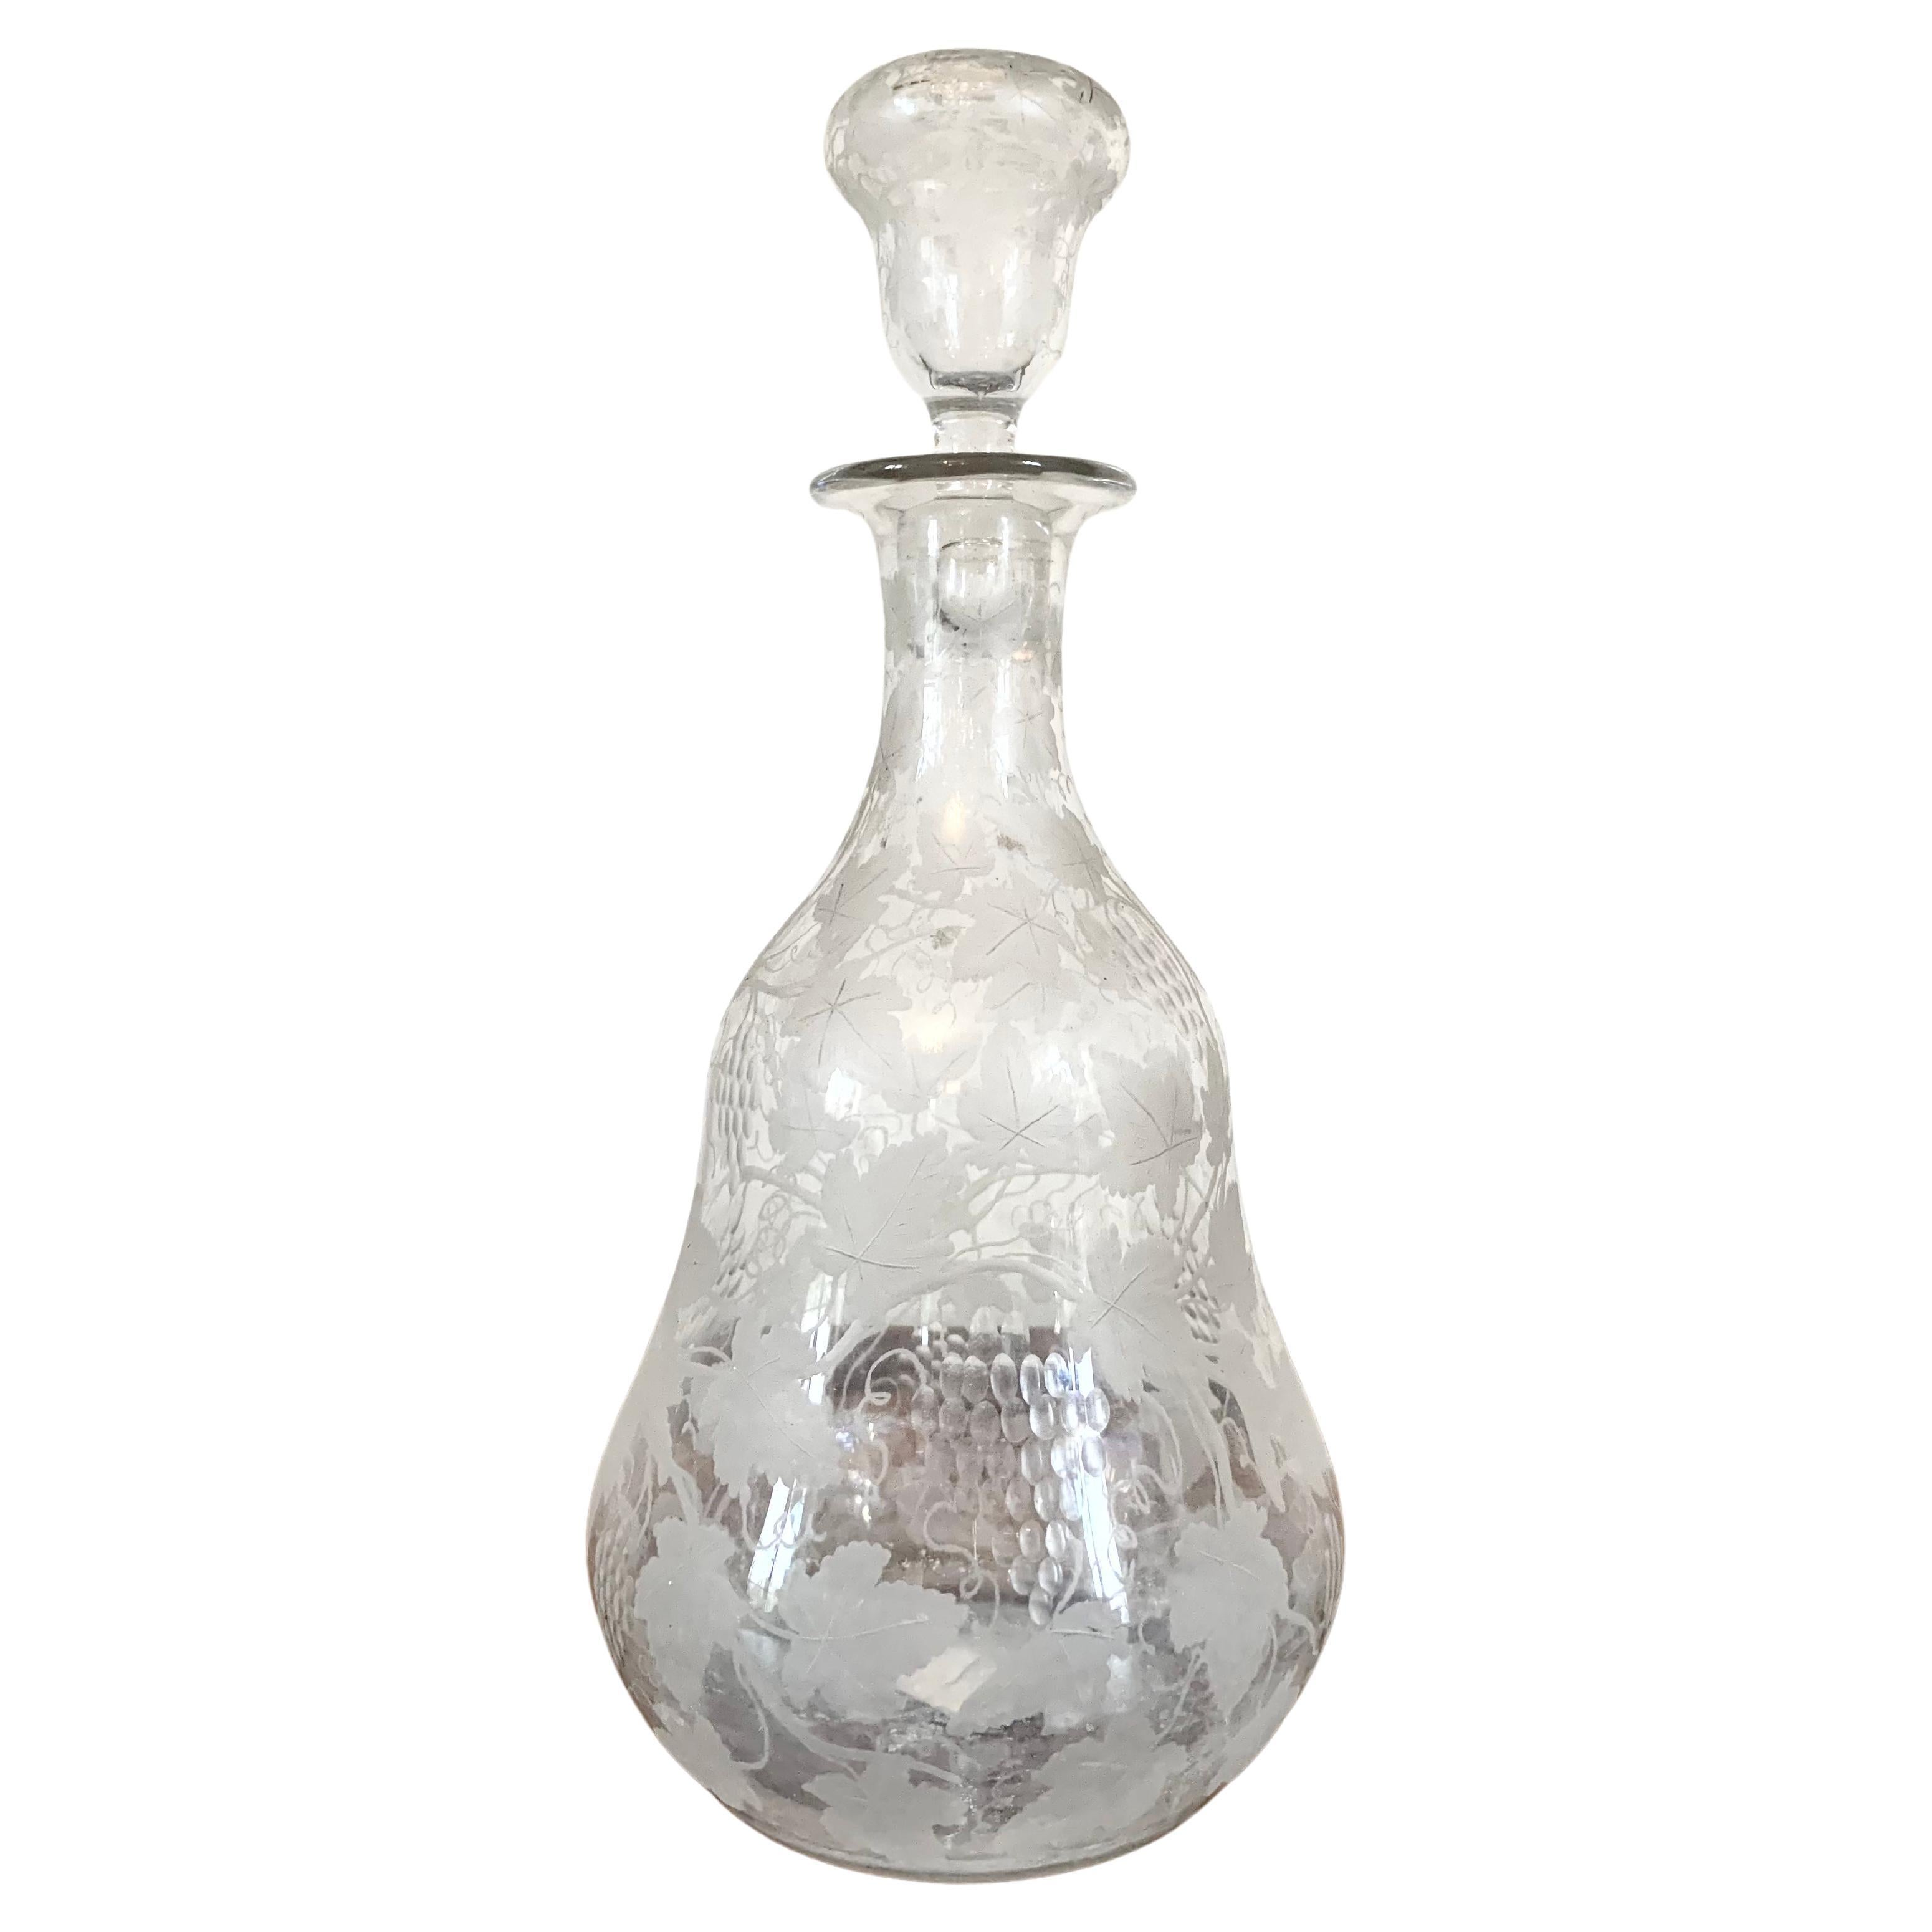  Crystal Decanter With Vine Decor Late 19th Century